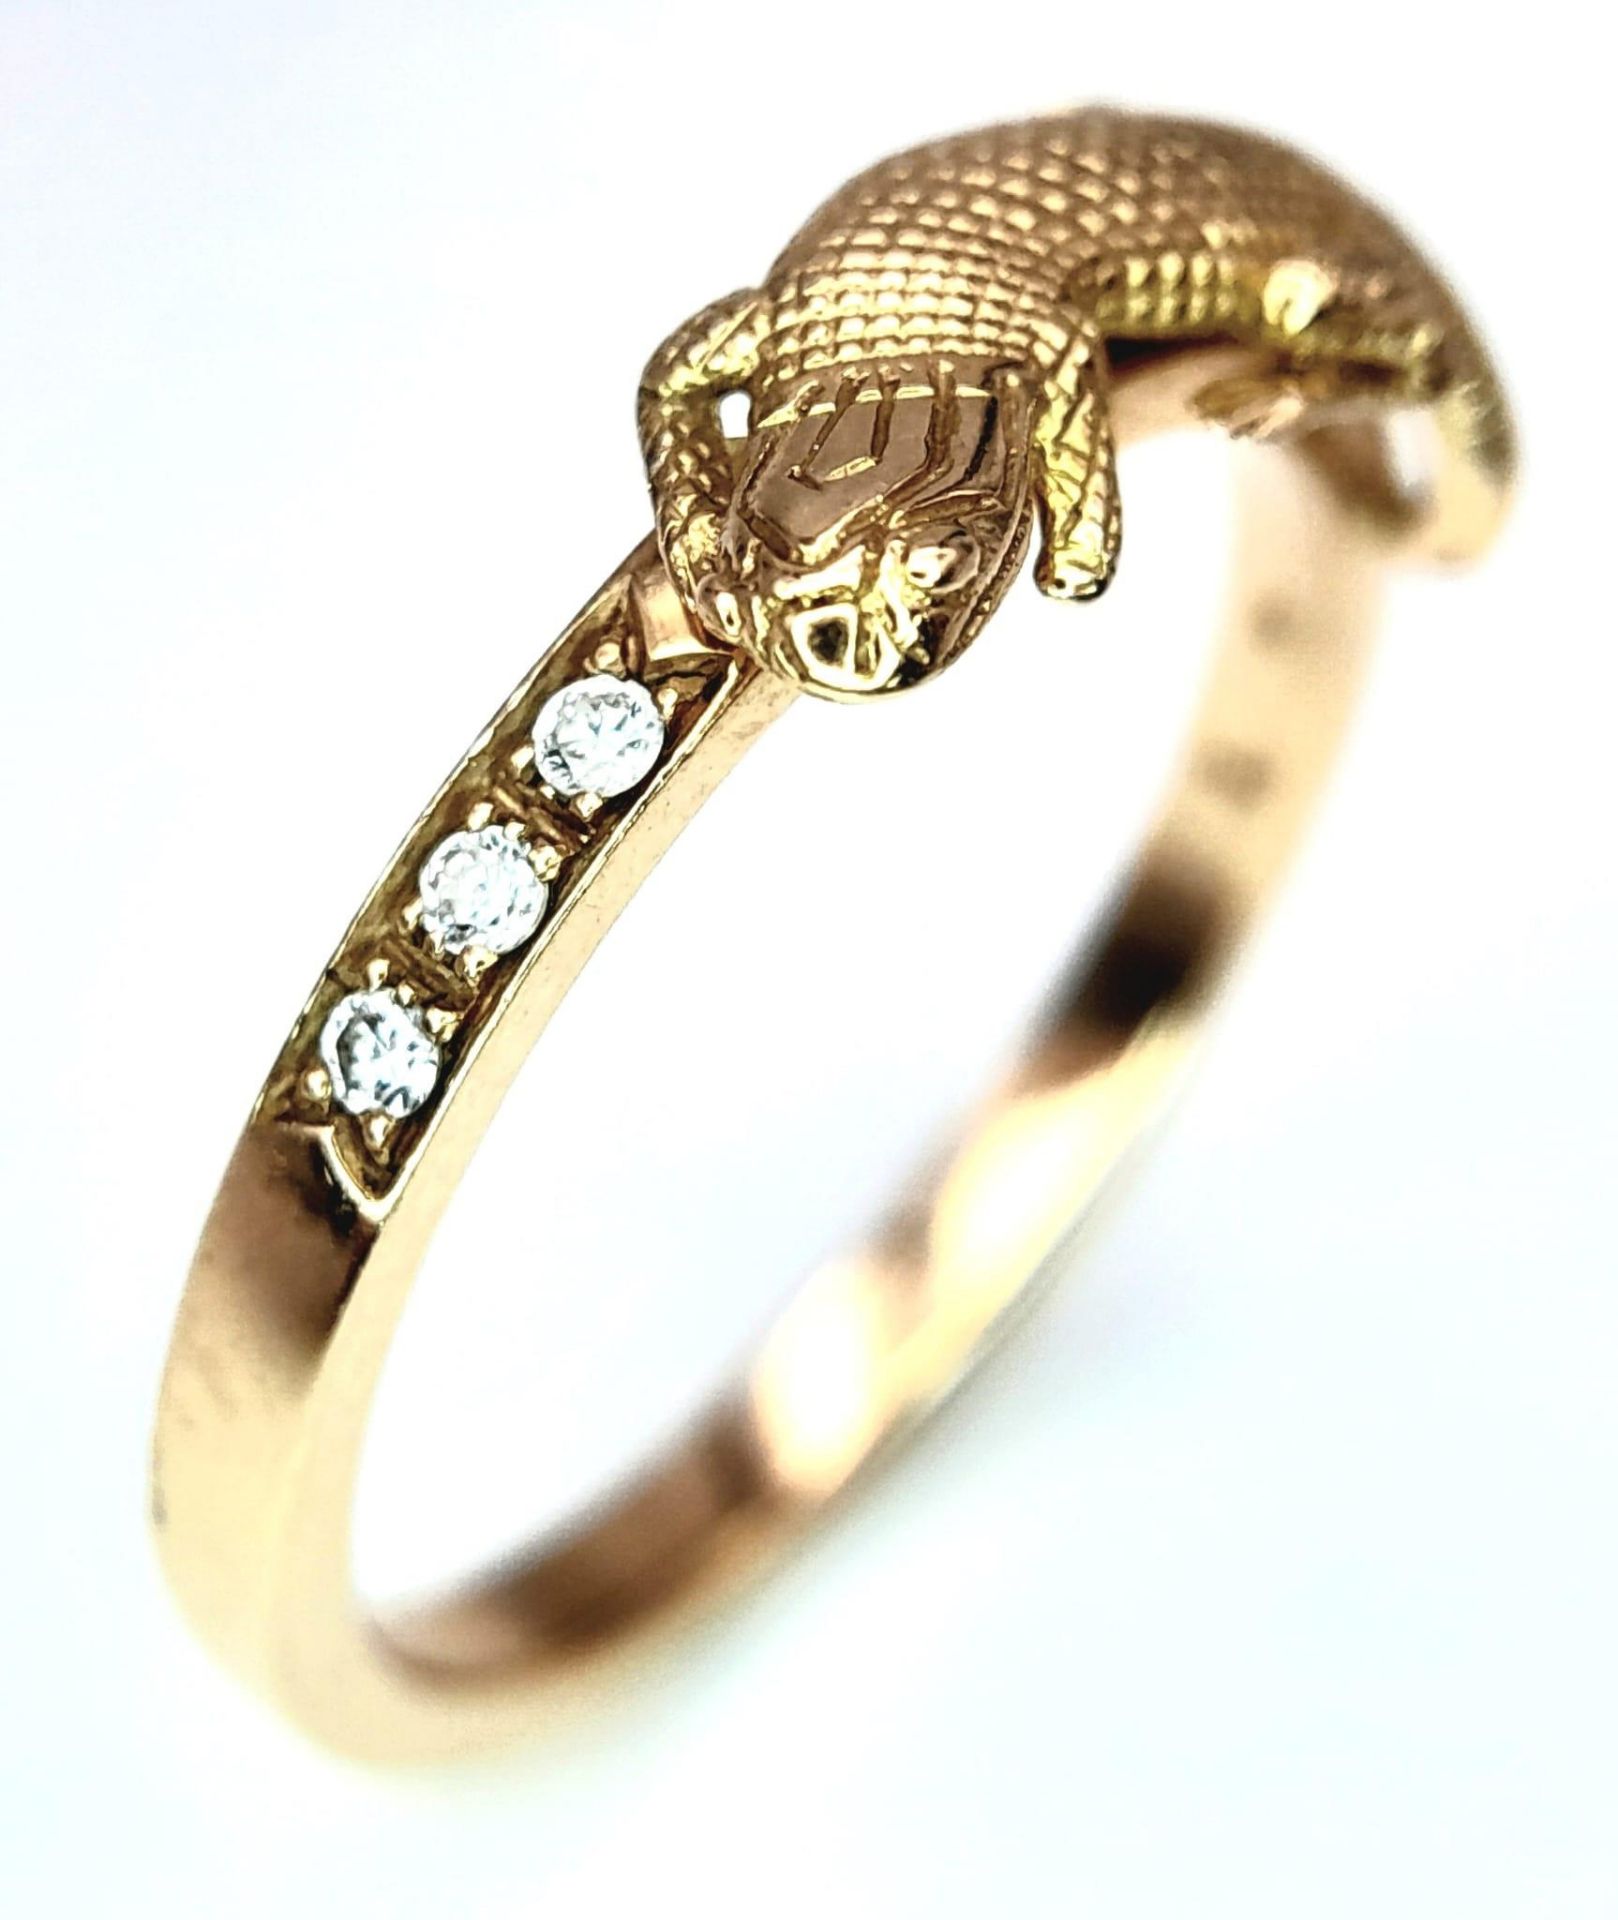 AN 18K YELLOW GOLD, THEO FENNELL (DESIGNER) DIAMOND SET LIZARD RING. 3G. SIZE M - Image 2 of 6